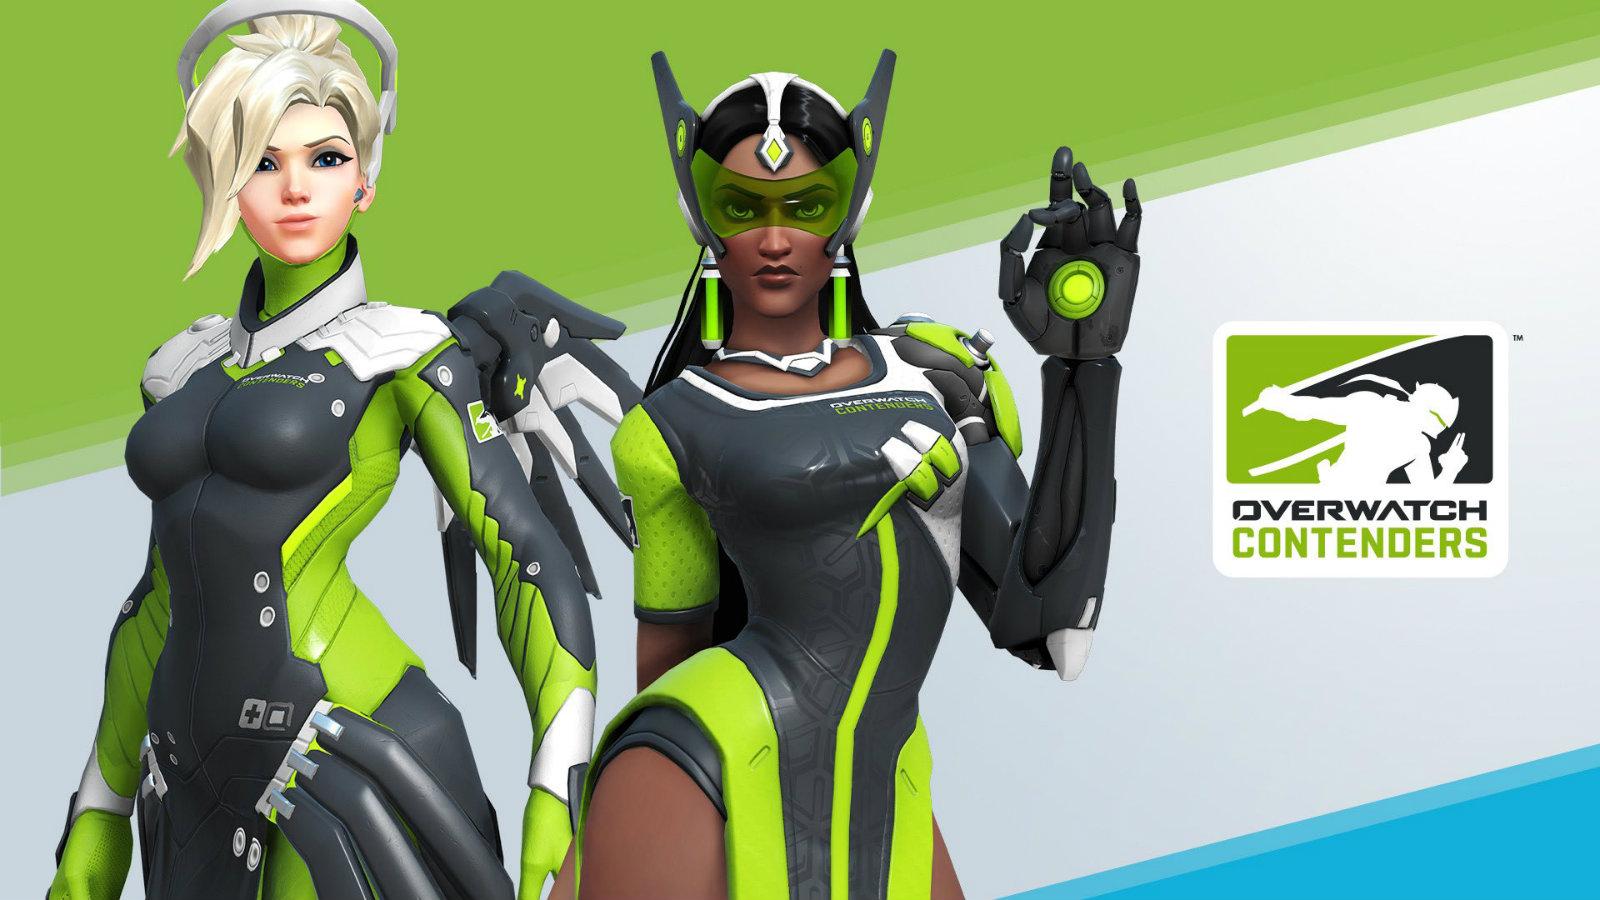 Mercy and Symmetra Overwatch Contenders skins